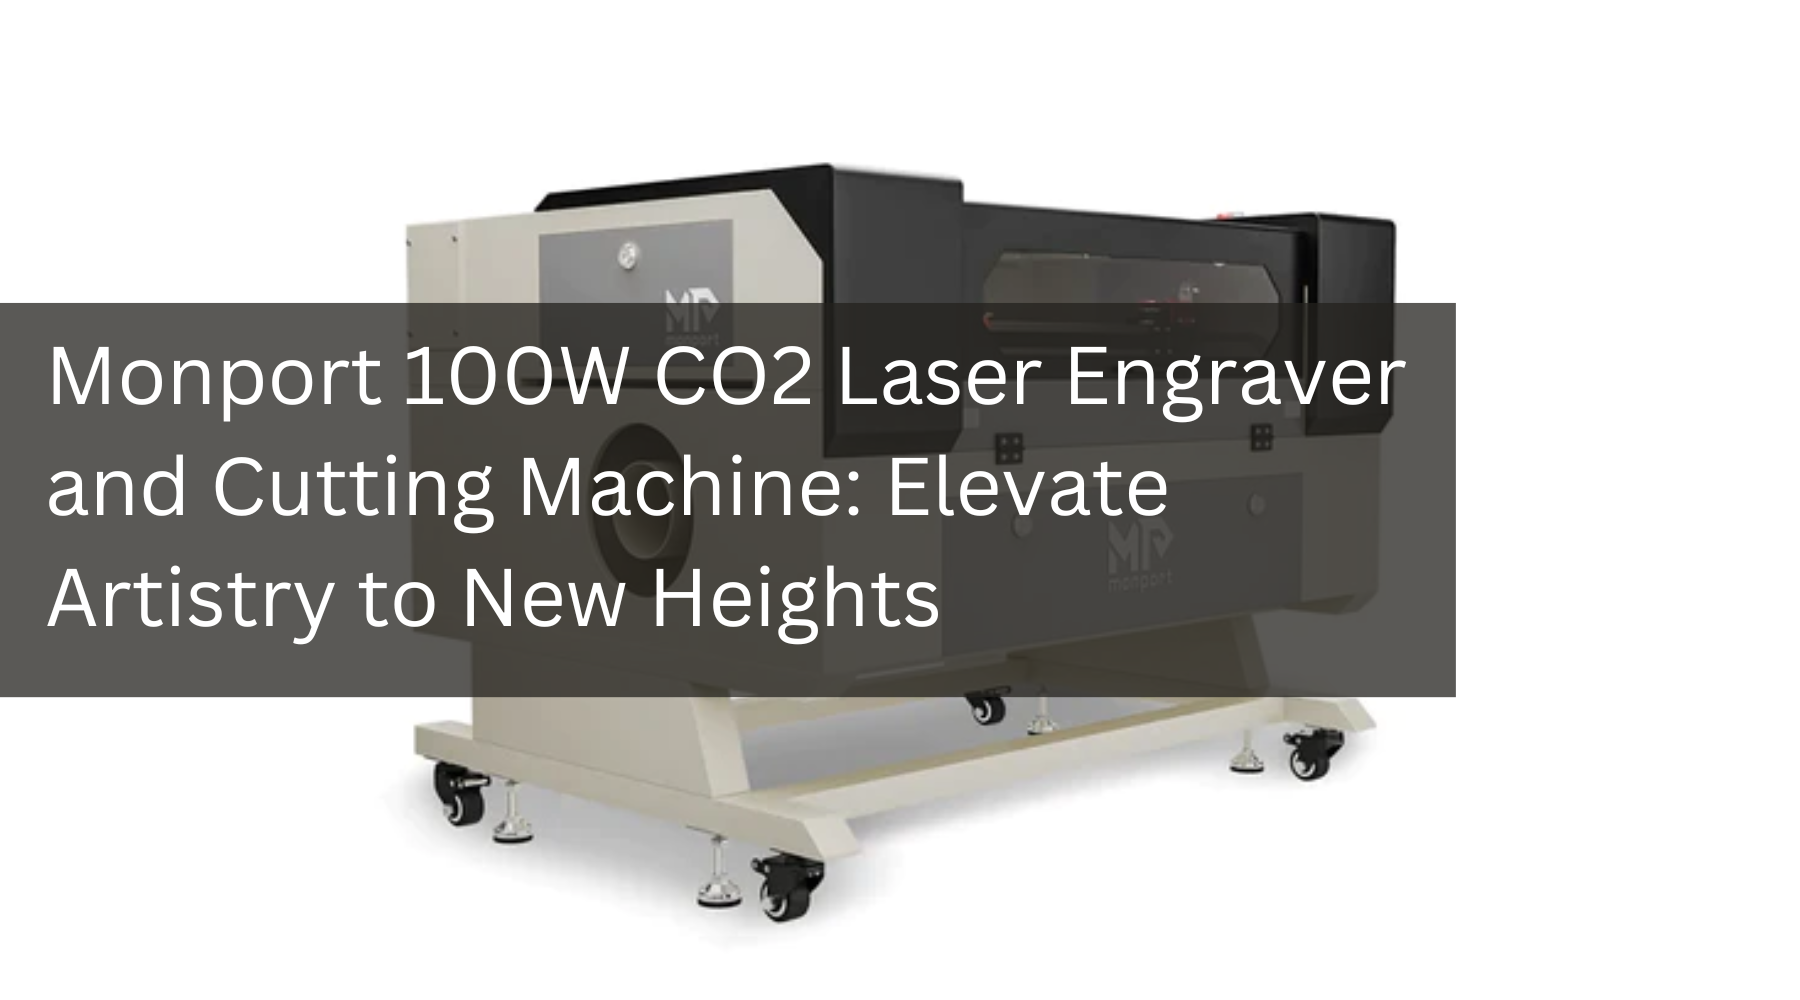 Monport 100W CO2 Laser Engraver and Cutting Machine: Elevate Artistry to New Heights